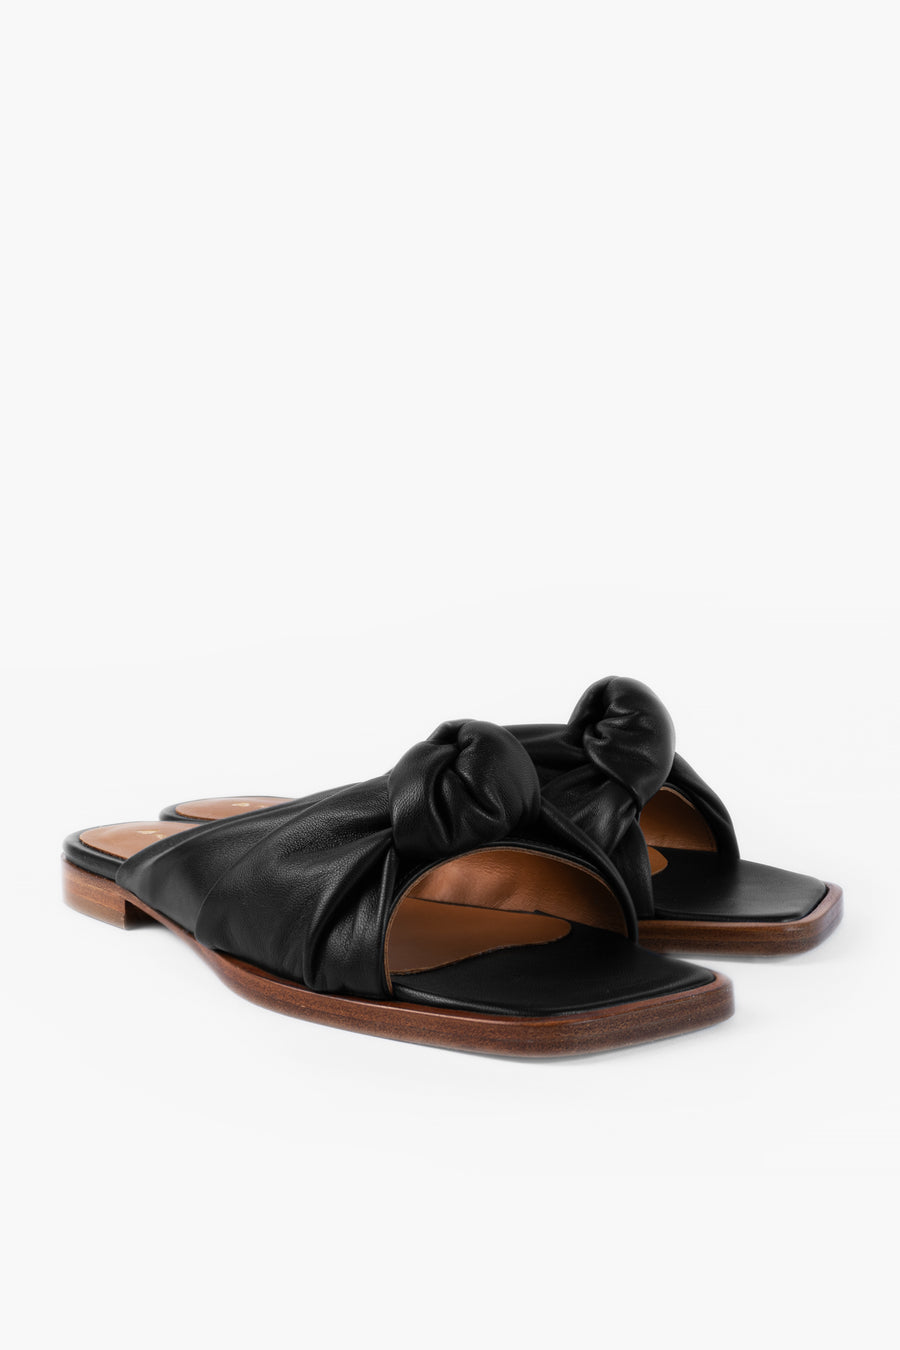  Sustainable, black coloured Tilly sandals, locally produced in Hamburg. Made from metal-free leather. Made in Germany by Alina Schürfeld.